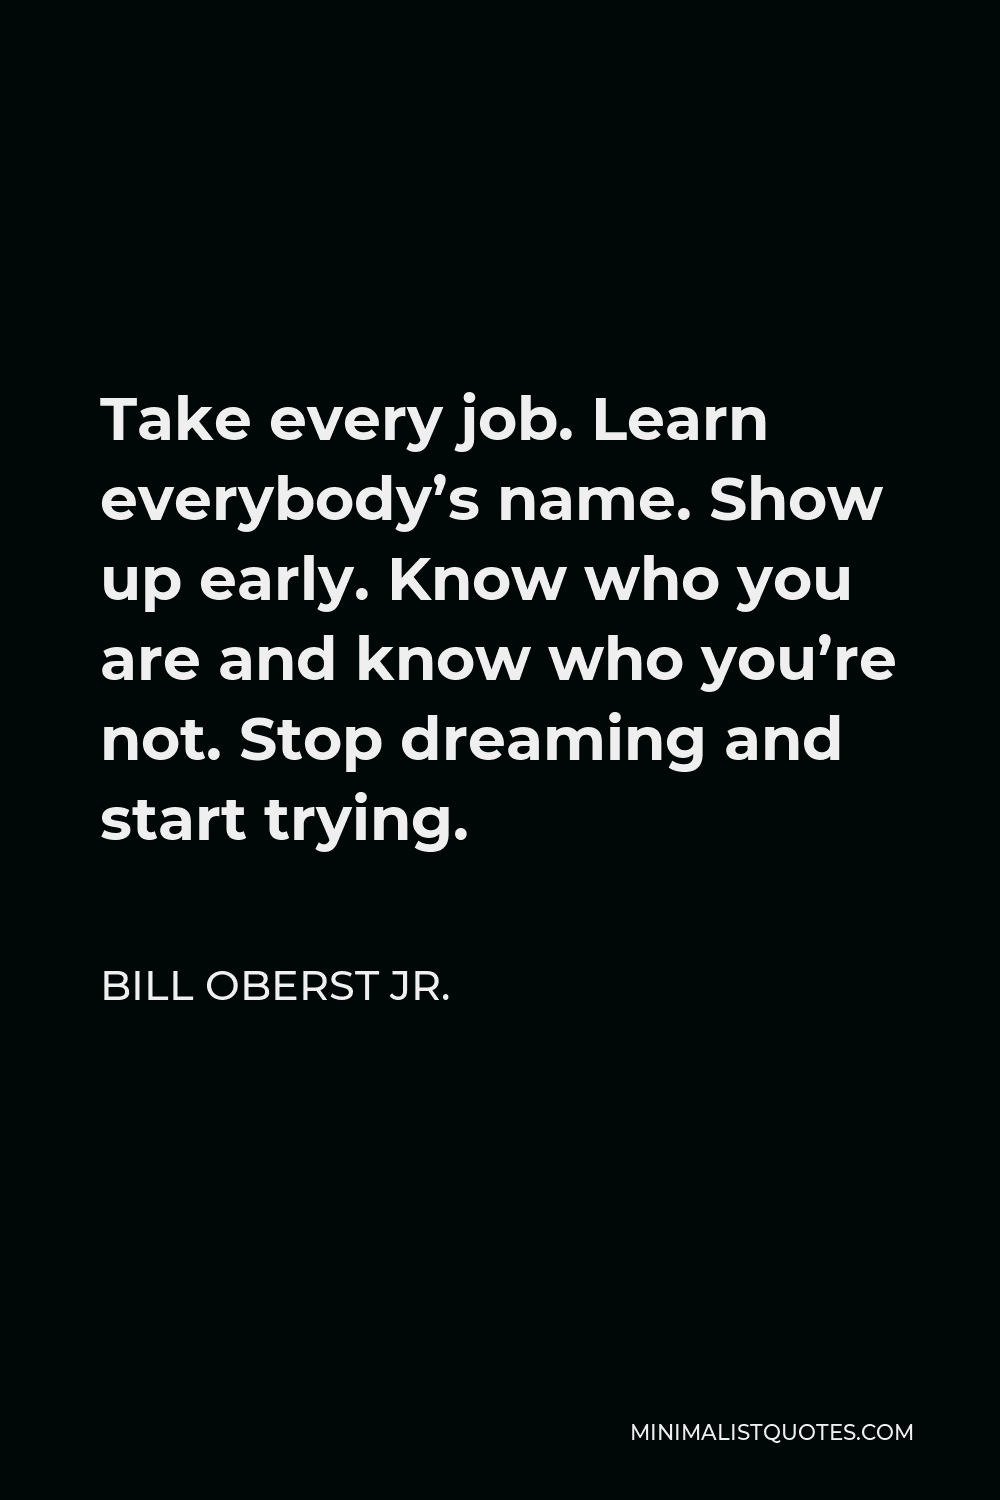 Bill Oberst Jr. Quote - Take every job. Learn everybody’s name. Show up early. Know who you are and know who you’re not. Stop dreaming and start trying.